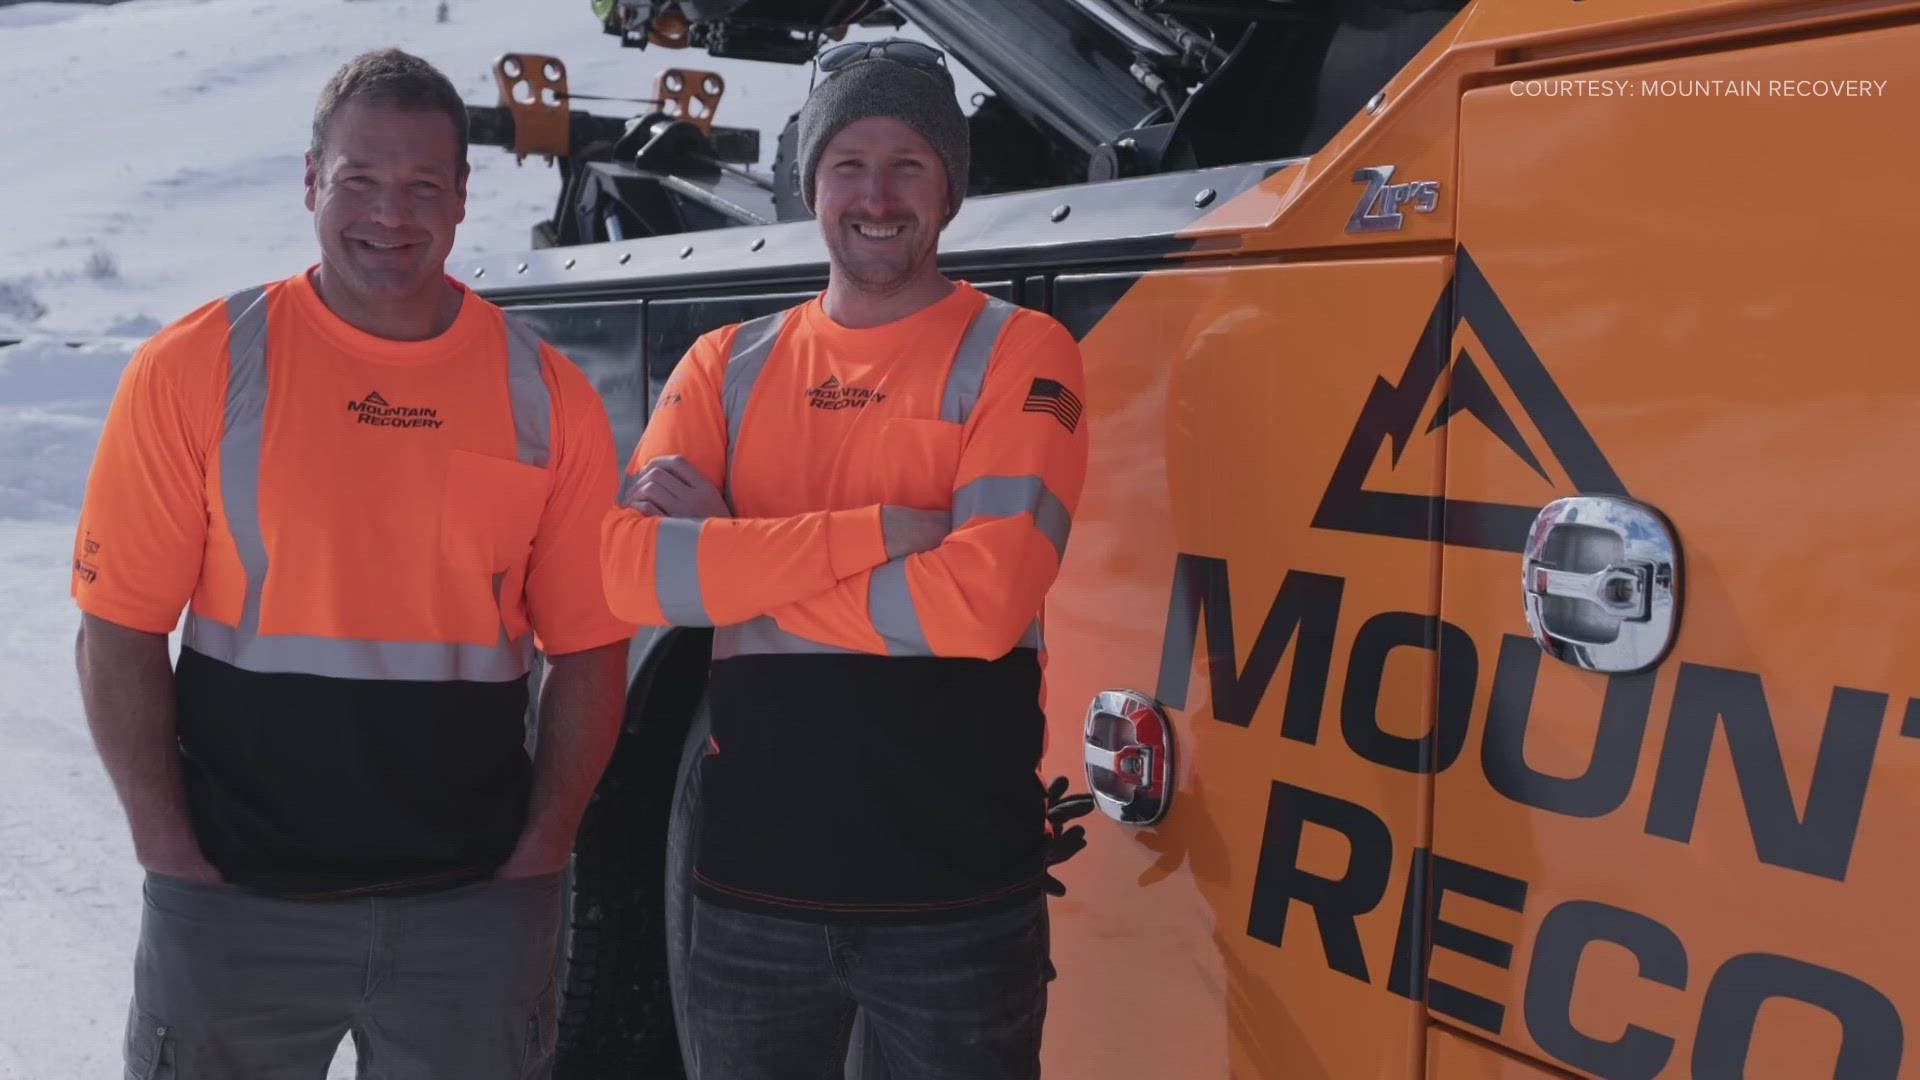 Colorado towing company to be featured in TV docuseries